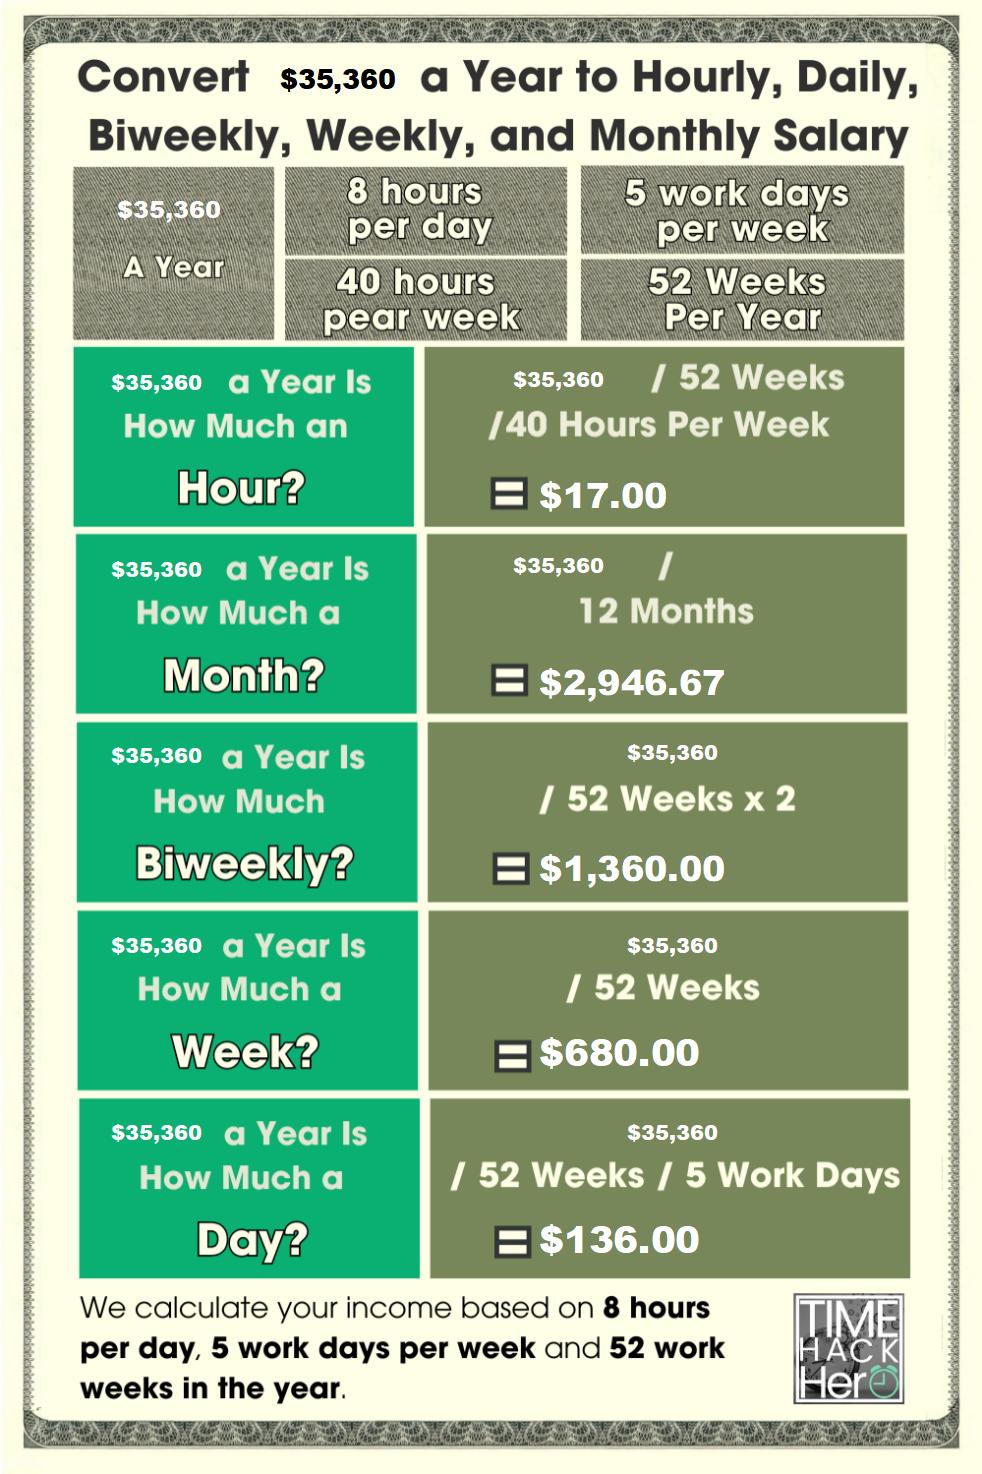 Convert $35360 a Year to Hourly, Daily, Biweekly, Weekly, and Monthly Salary